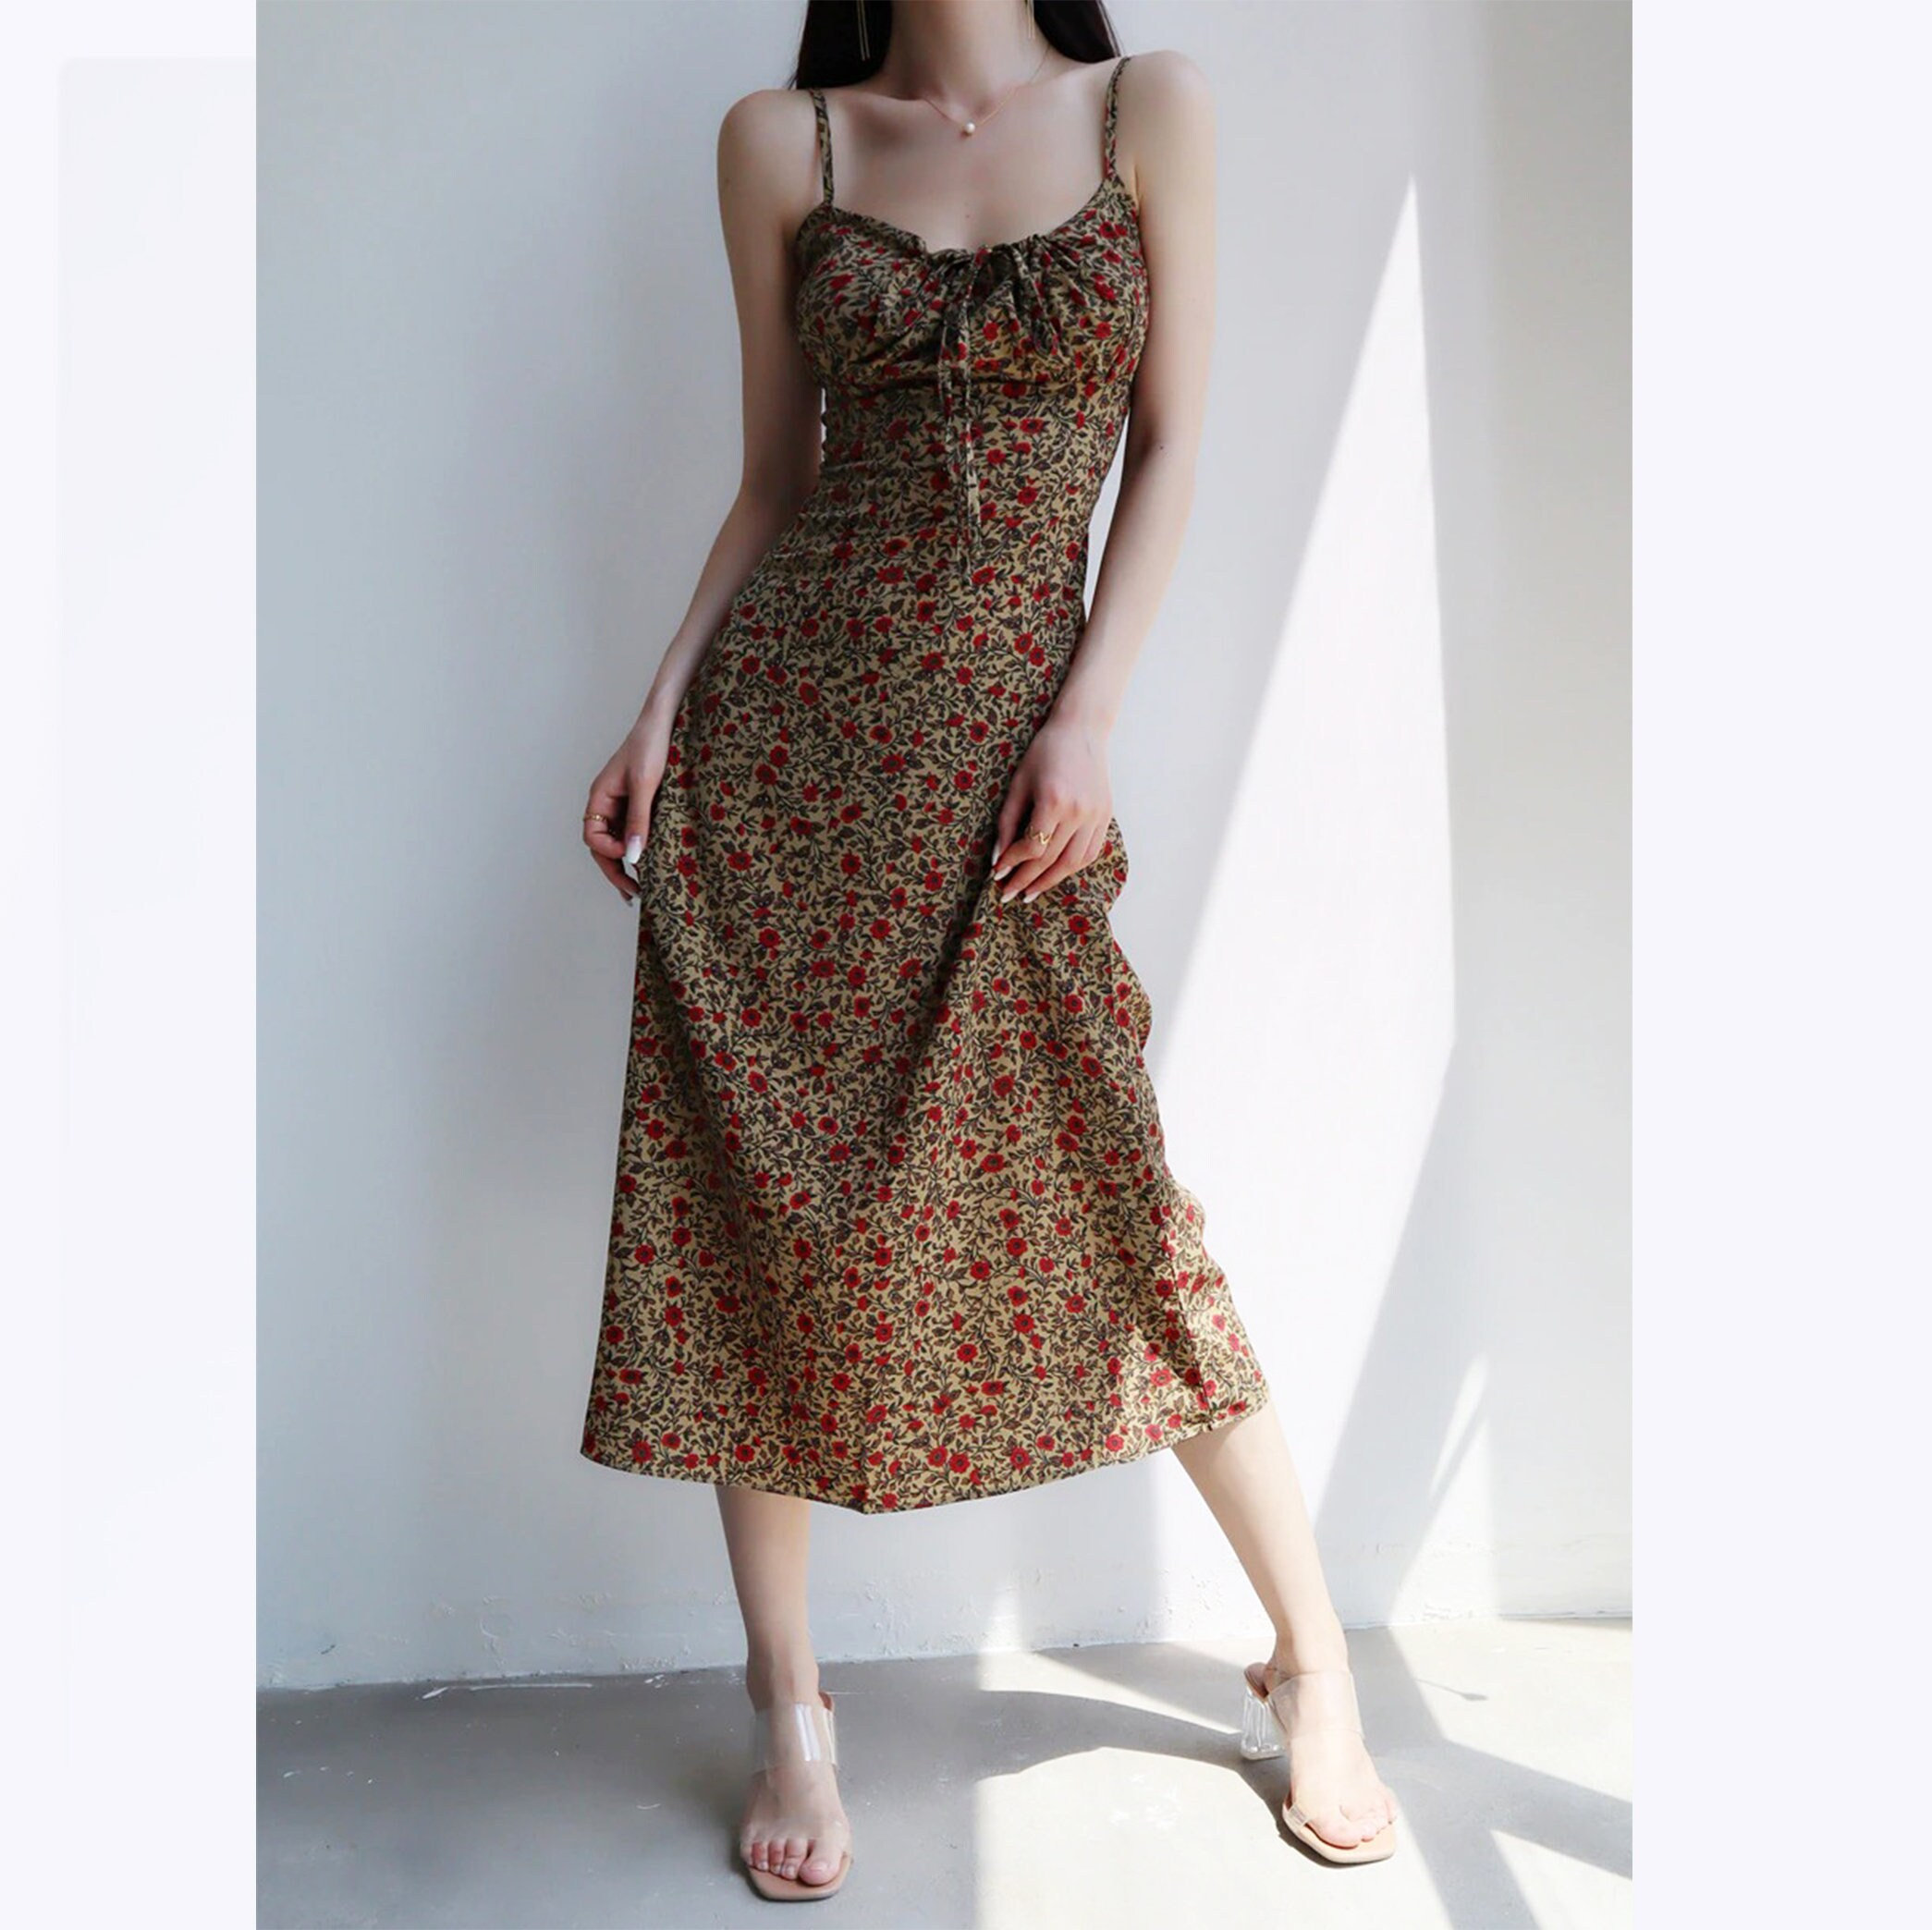 Y2K Floral Cami Dress - Midi Length, Tie Front Style